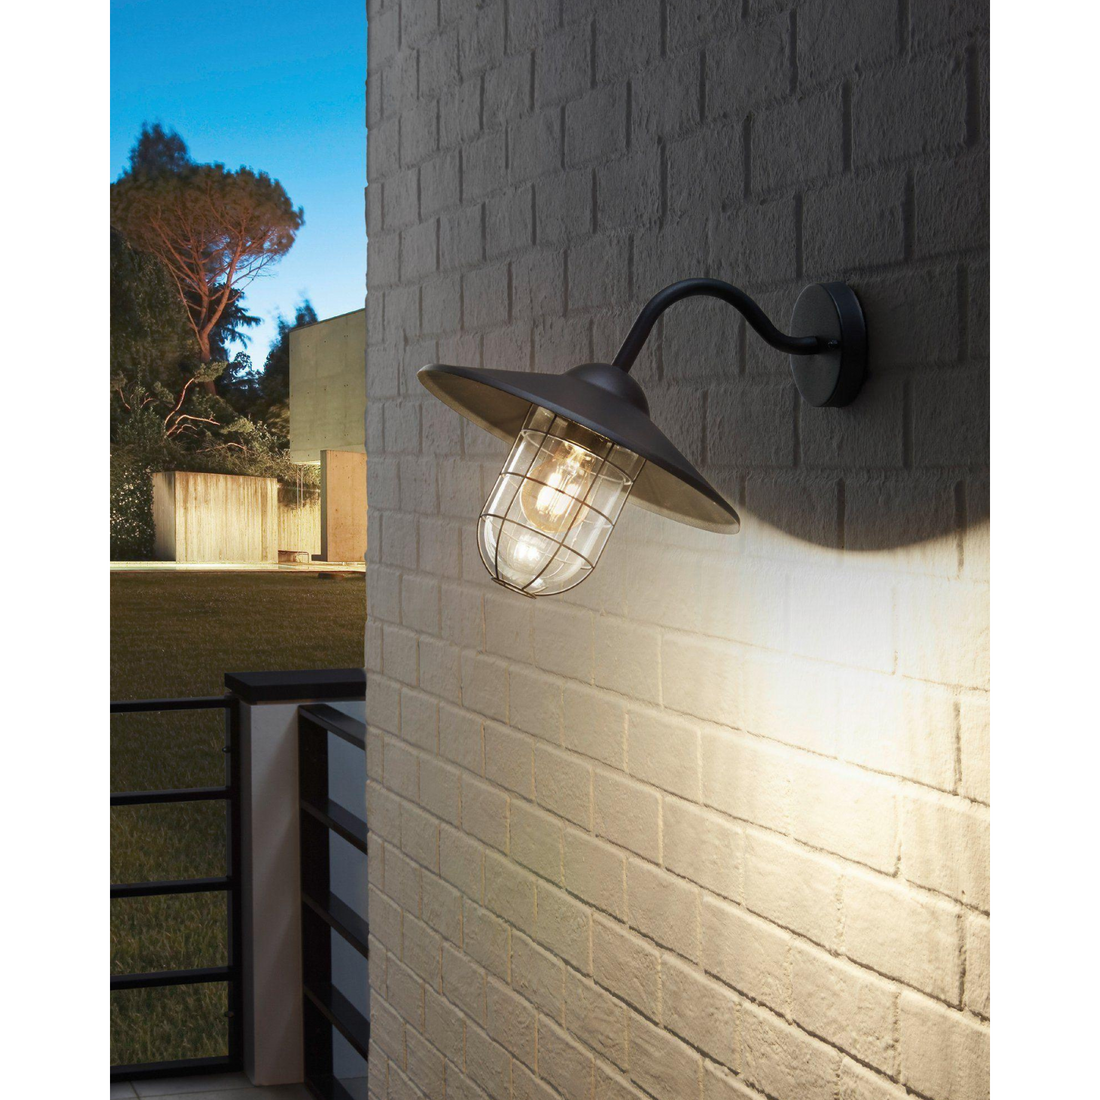 MELGOA Outdoor Wall Light by The Light Library